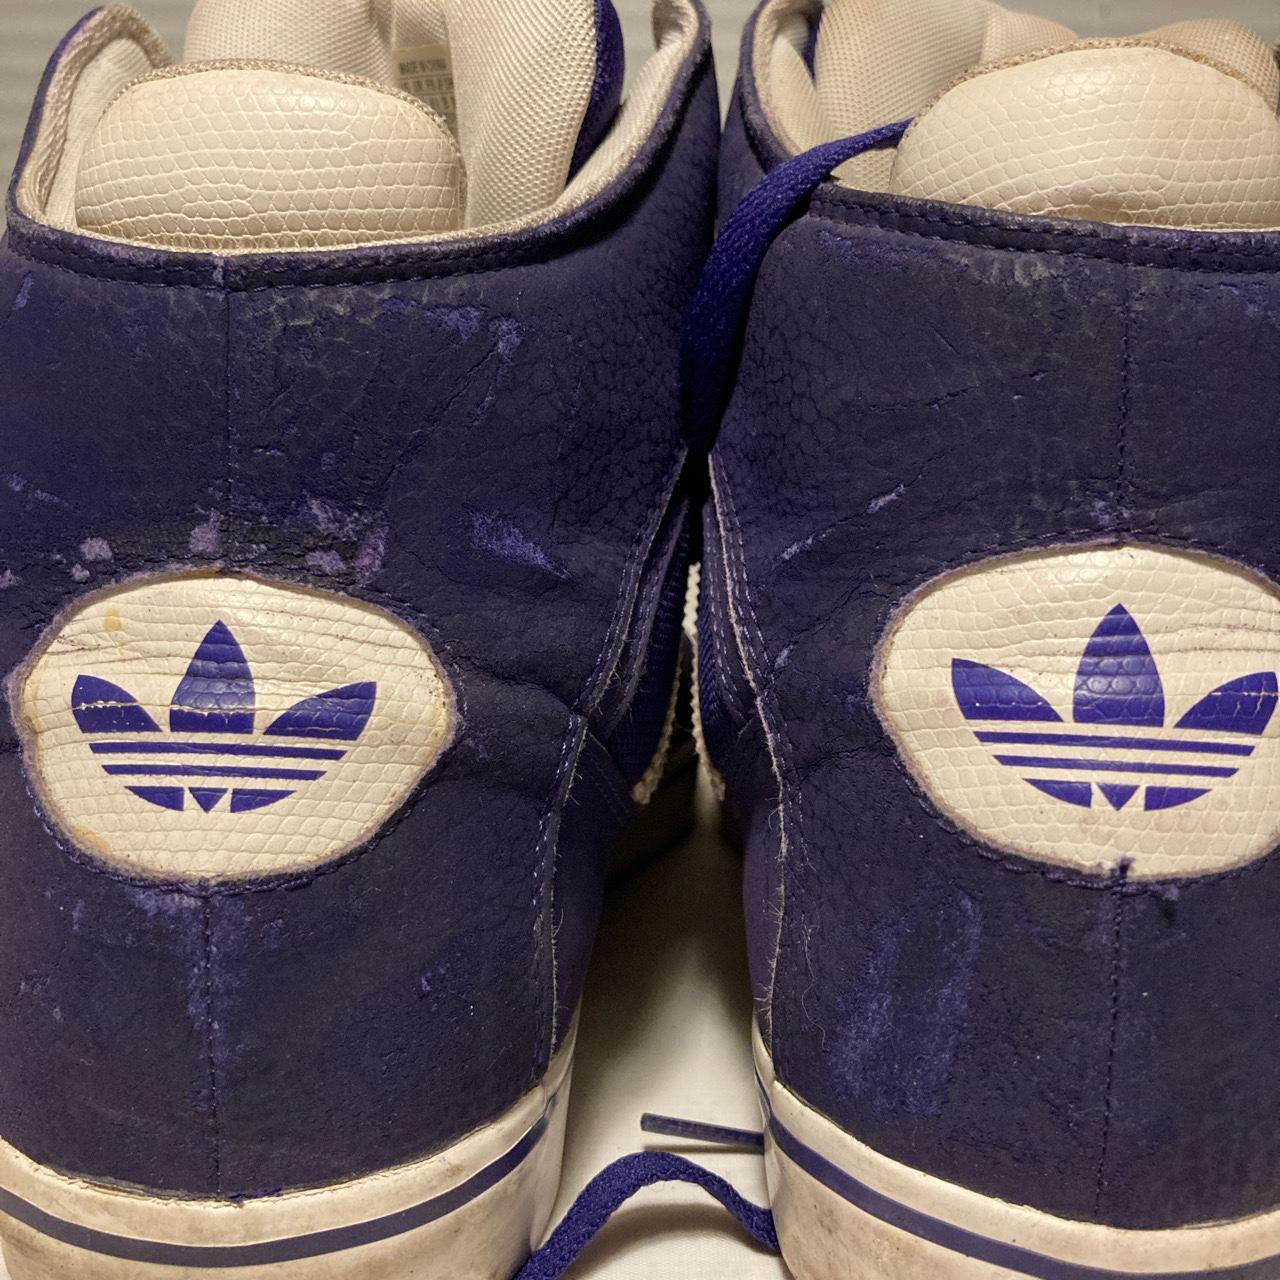 Purple Adidas High Tops Size 11 Well loved with no... - Depop